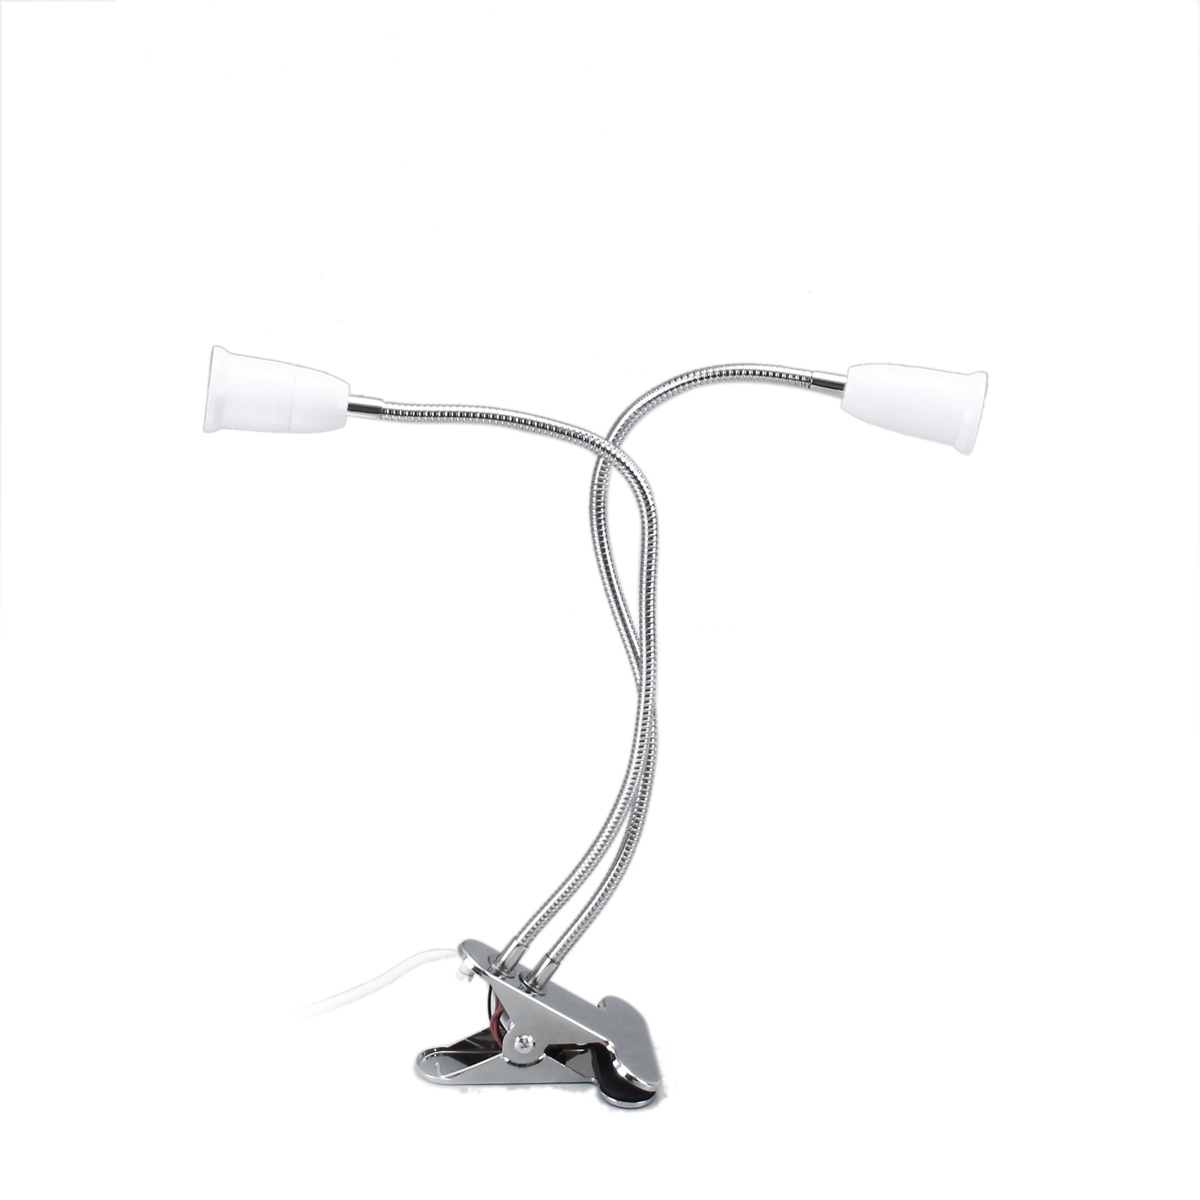 40CM-E27-Flexible-Dual-Head-Clip-Lampholder-Bulb-Adapter-with-Onoff-Switch-for-LED-Grow-Light-1291243-4